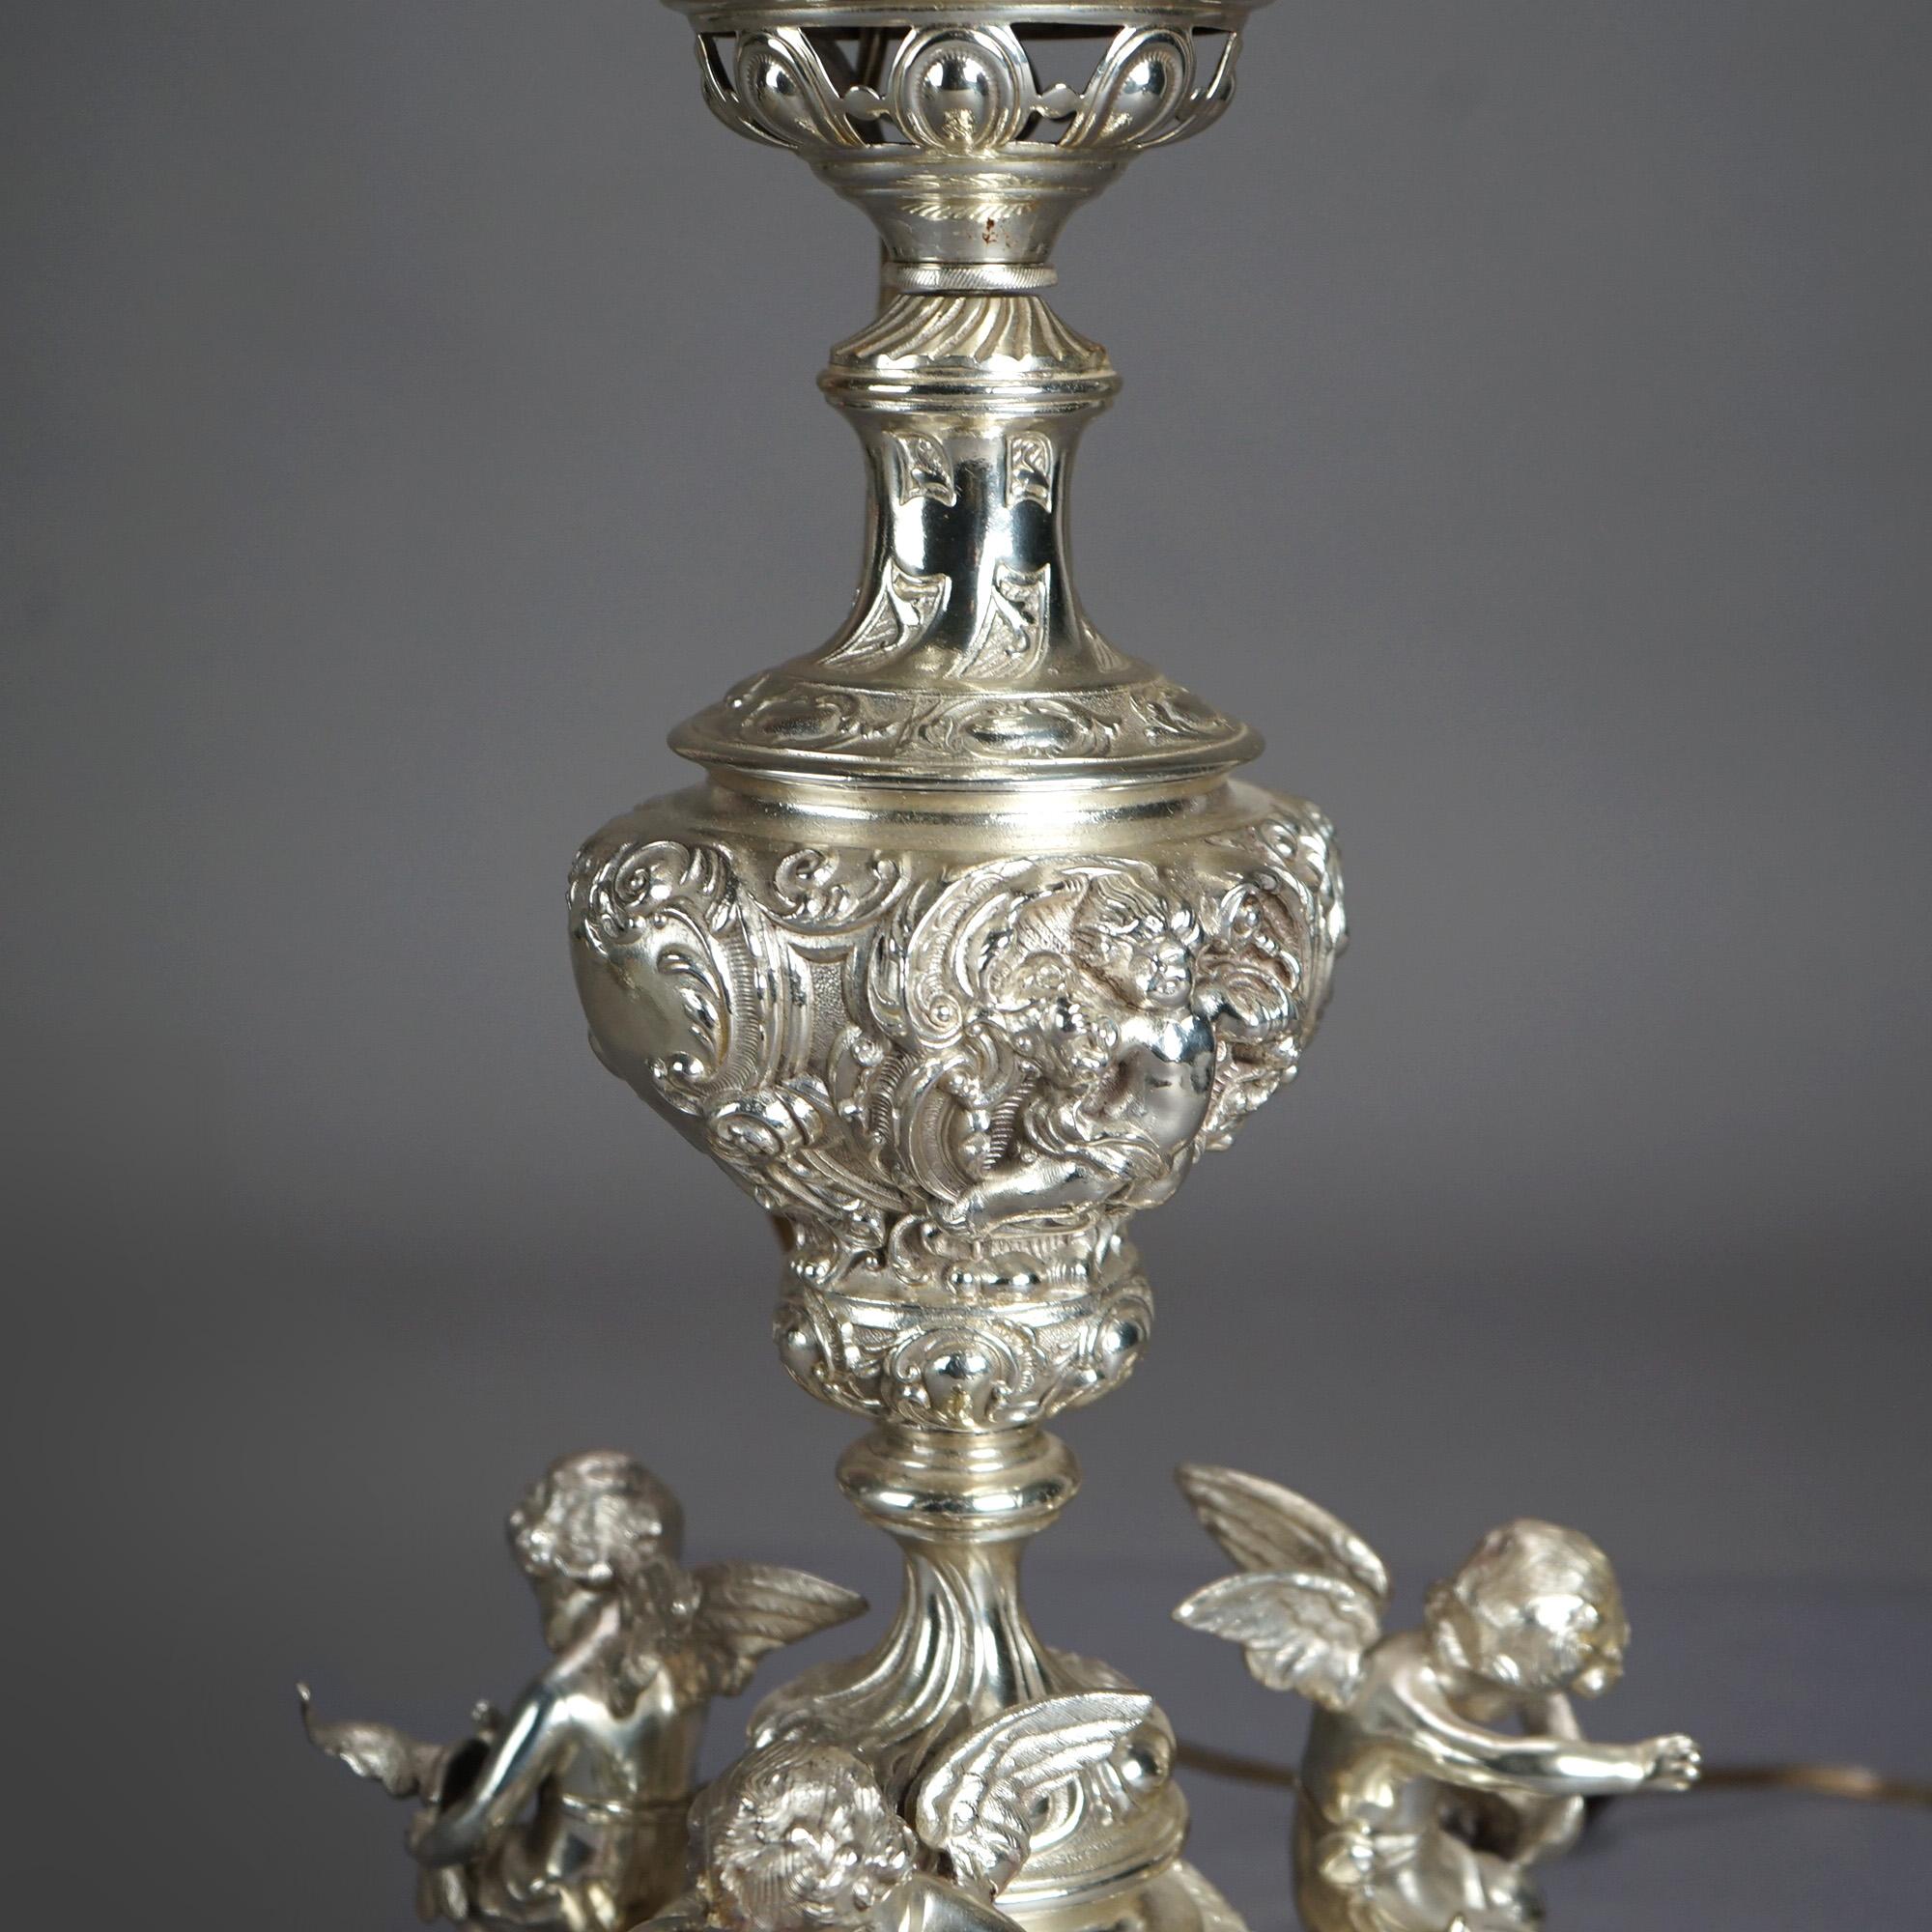 Antique Rococo Figural Silver Plate Parlor Lamp With Winged Cherubs c1890 3